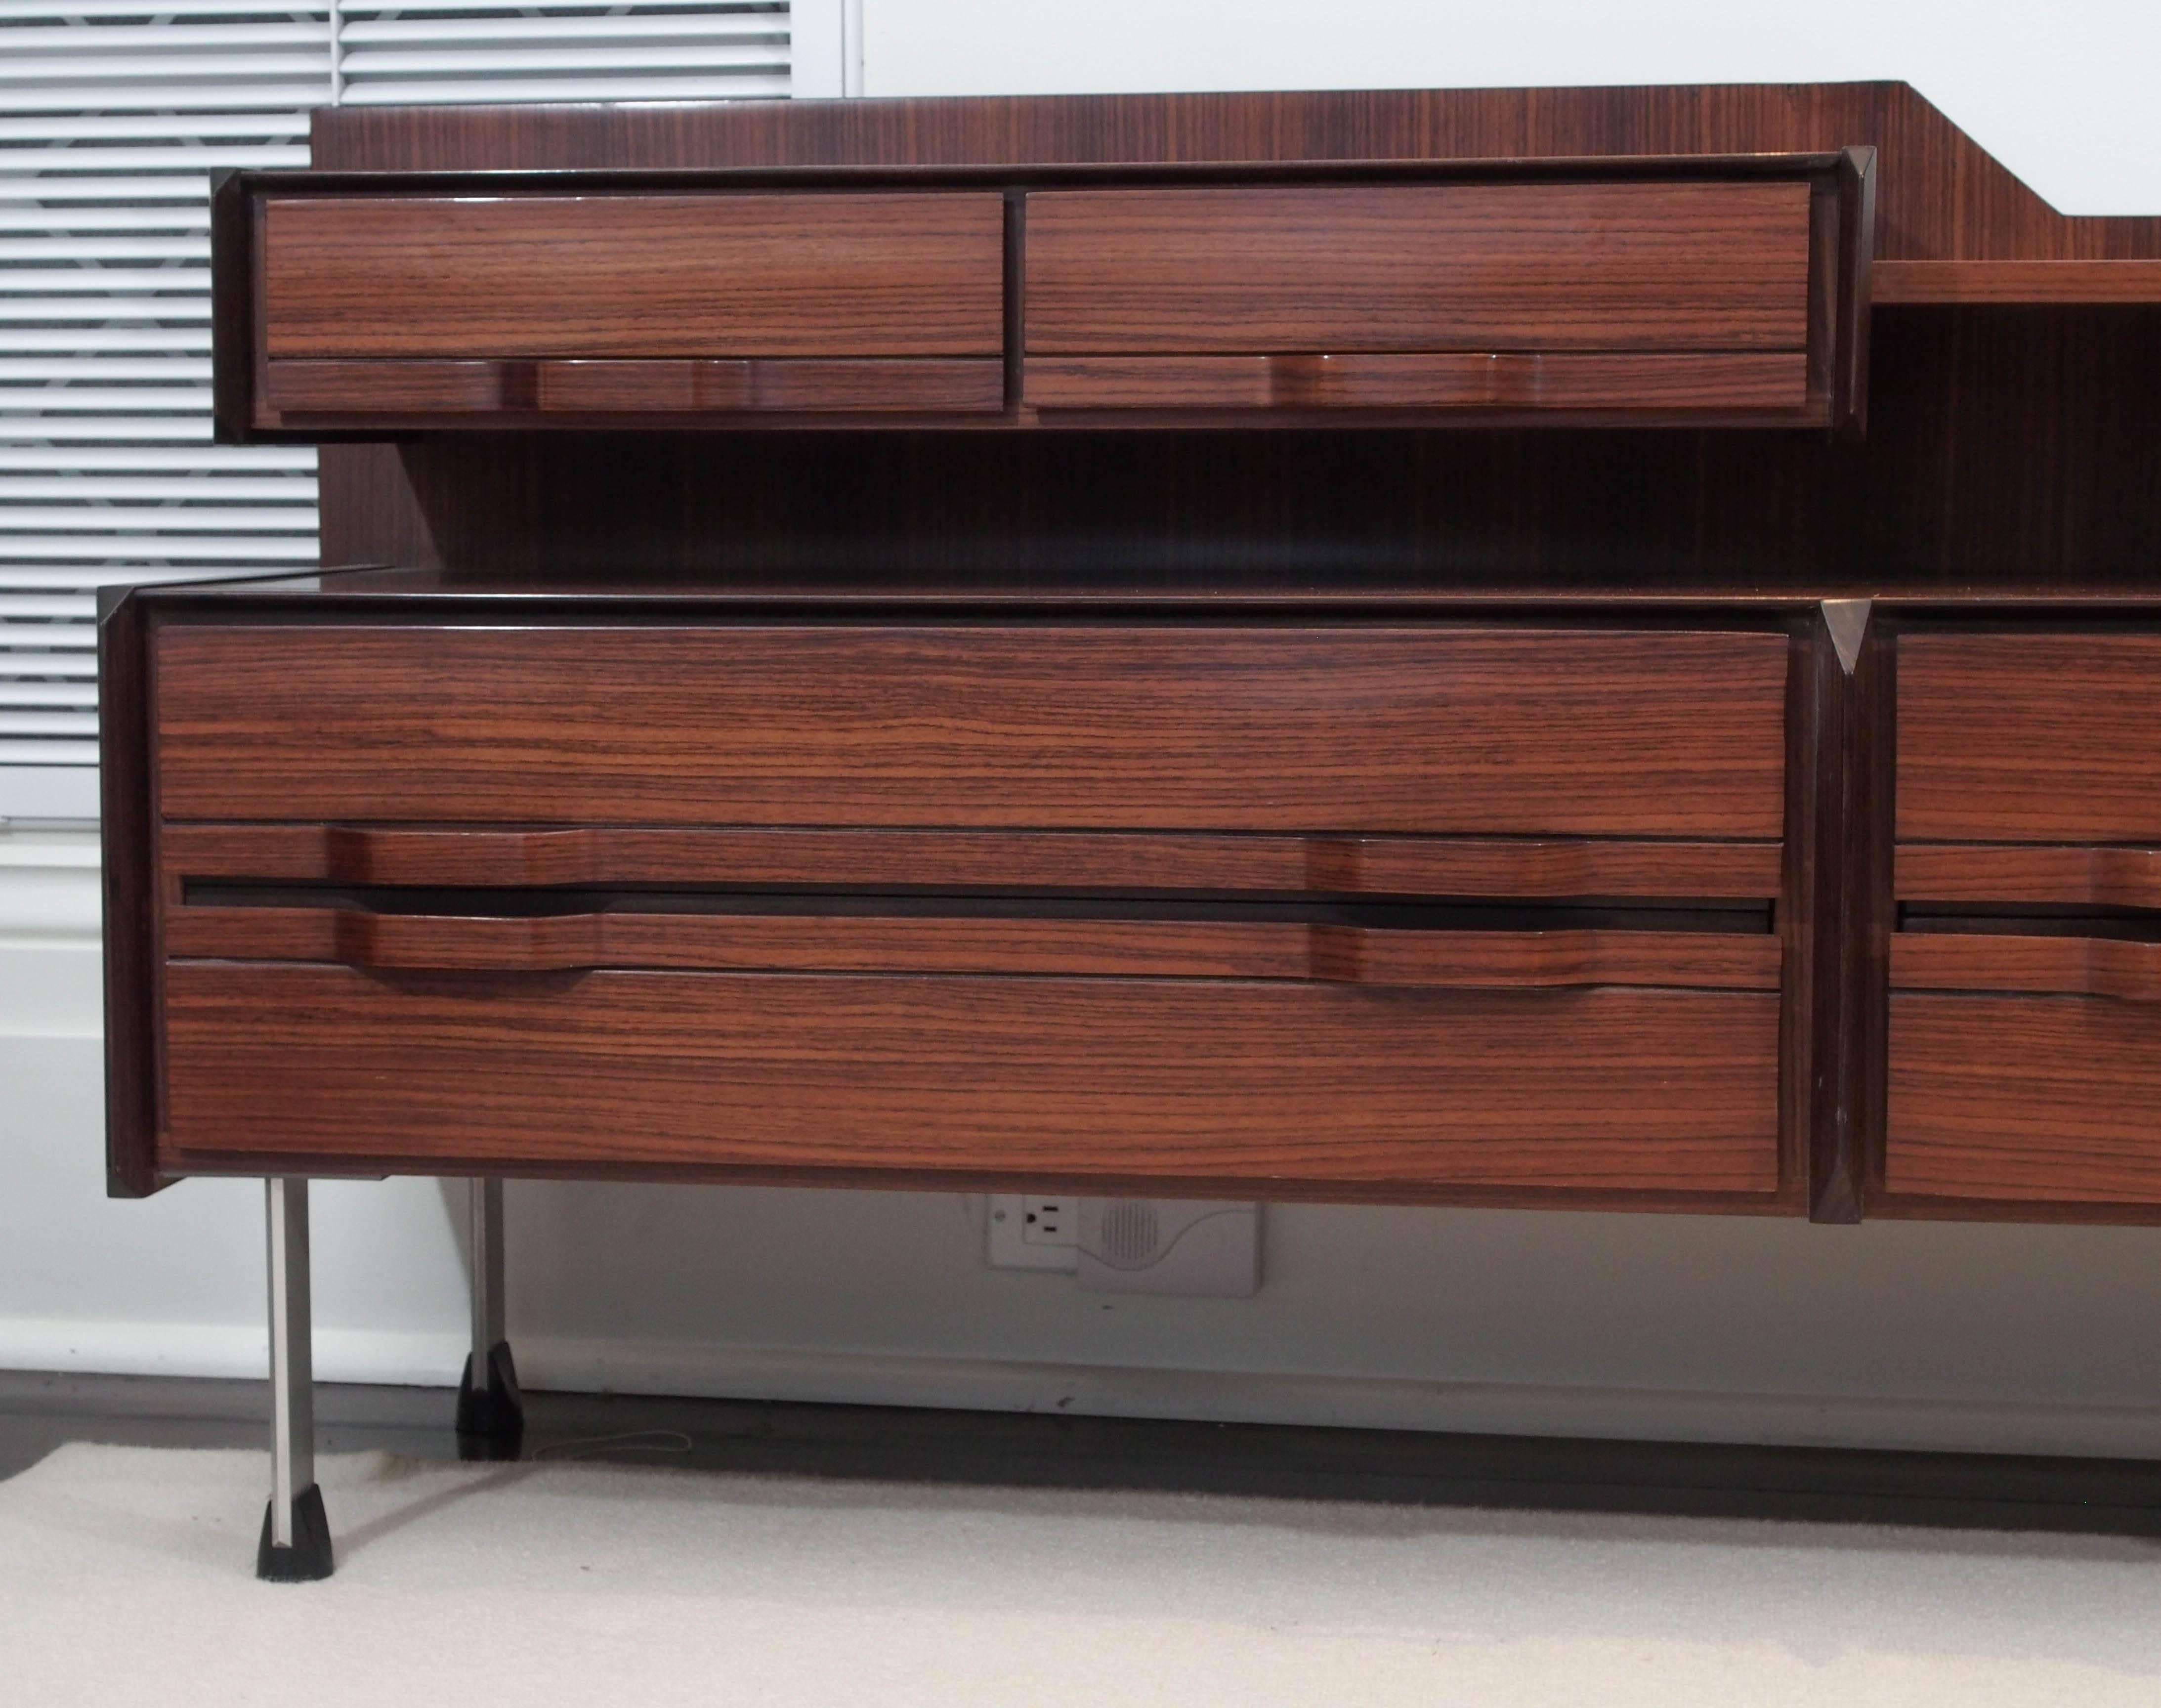 Two level credenza in teak; two drawers above, four below, each with shaped integral pulls; steel legs with rubber feet.